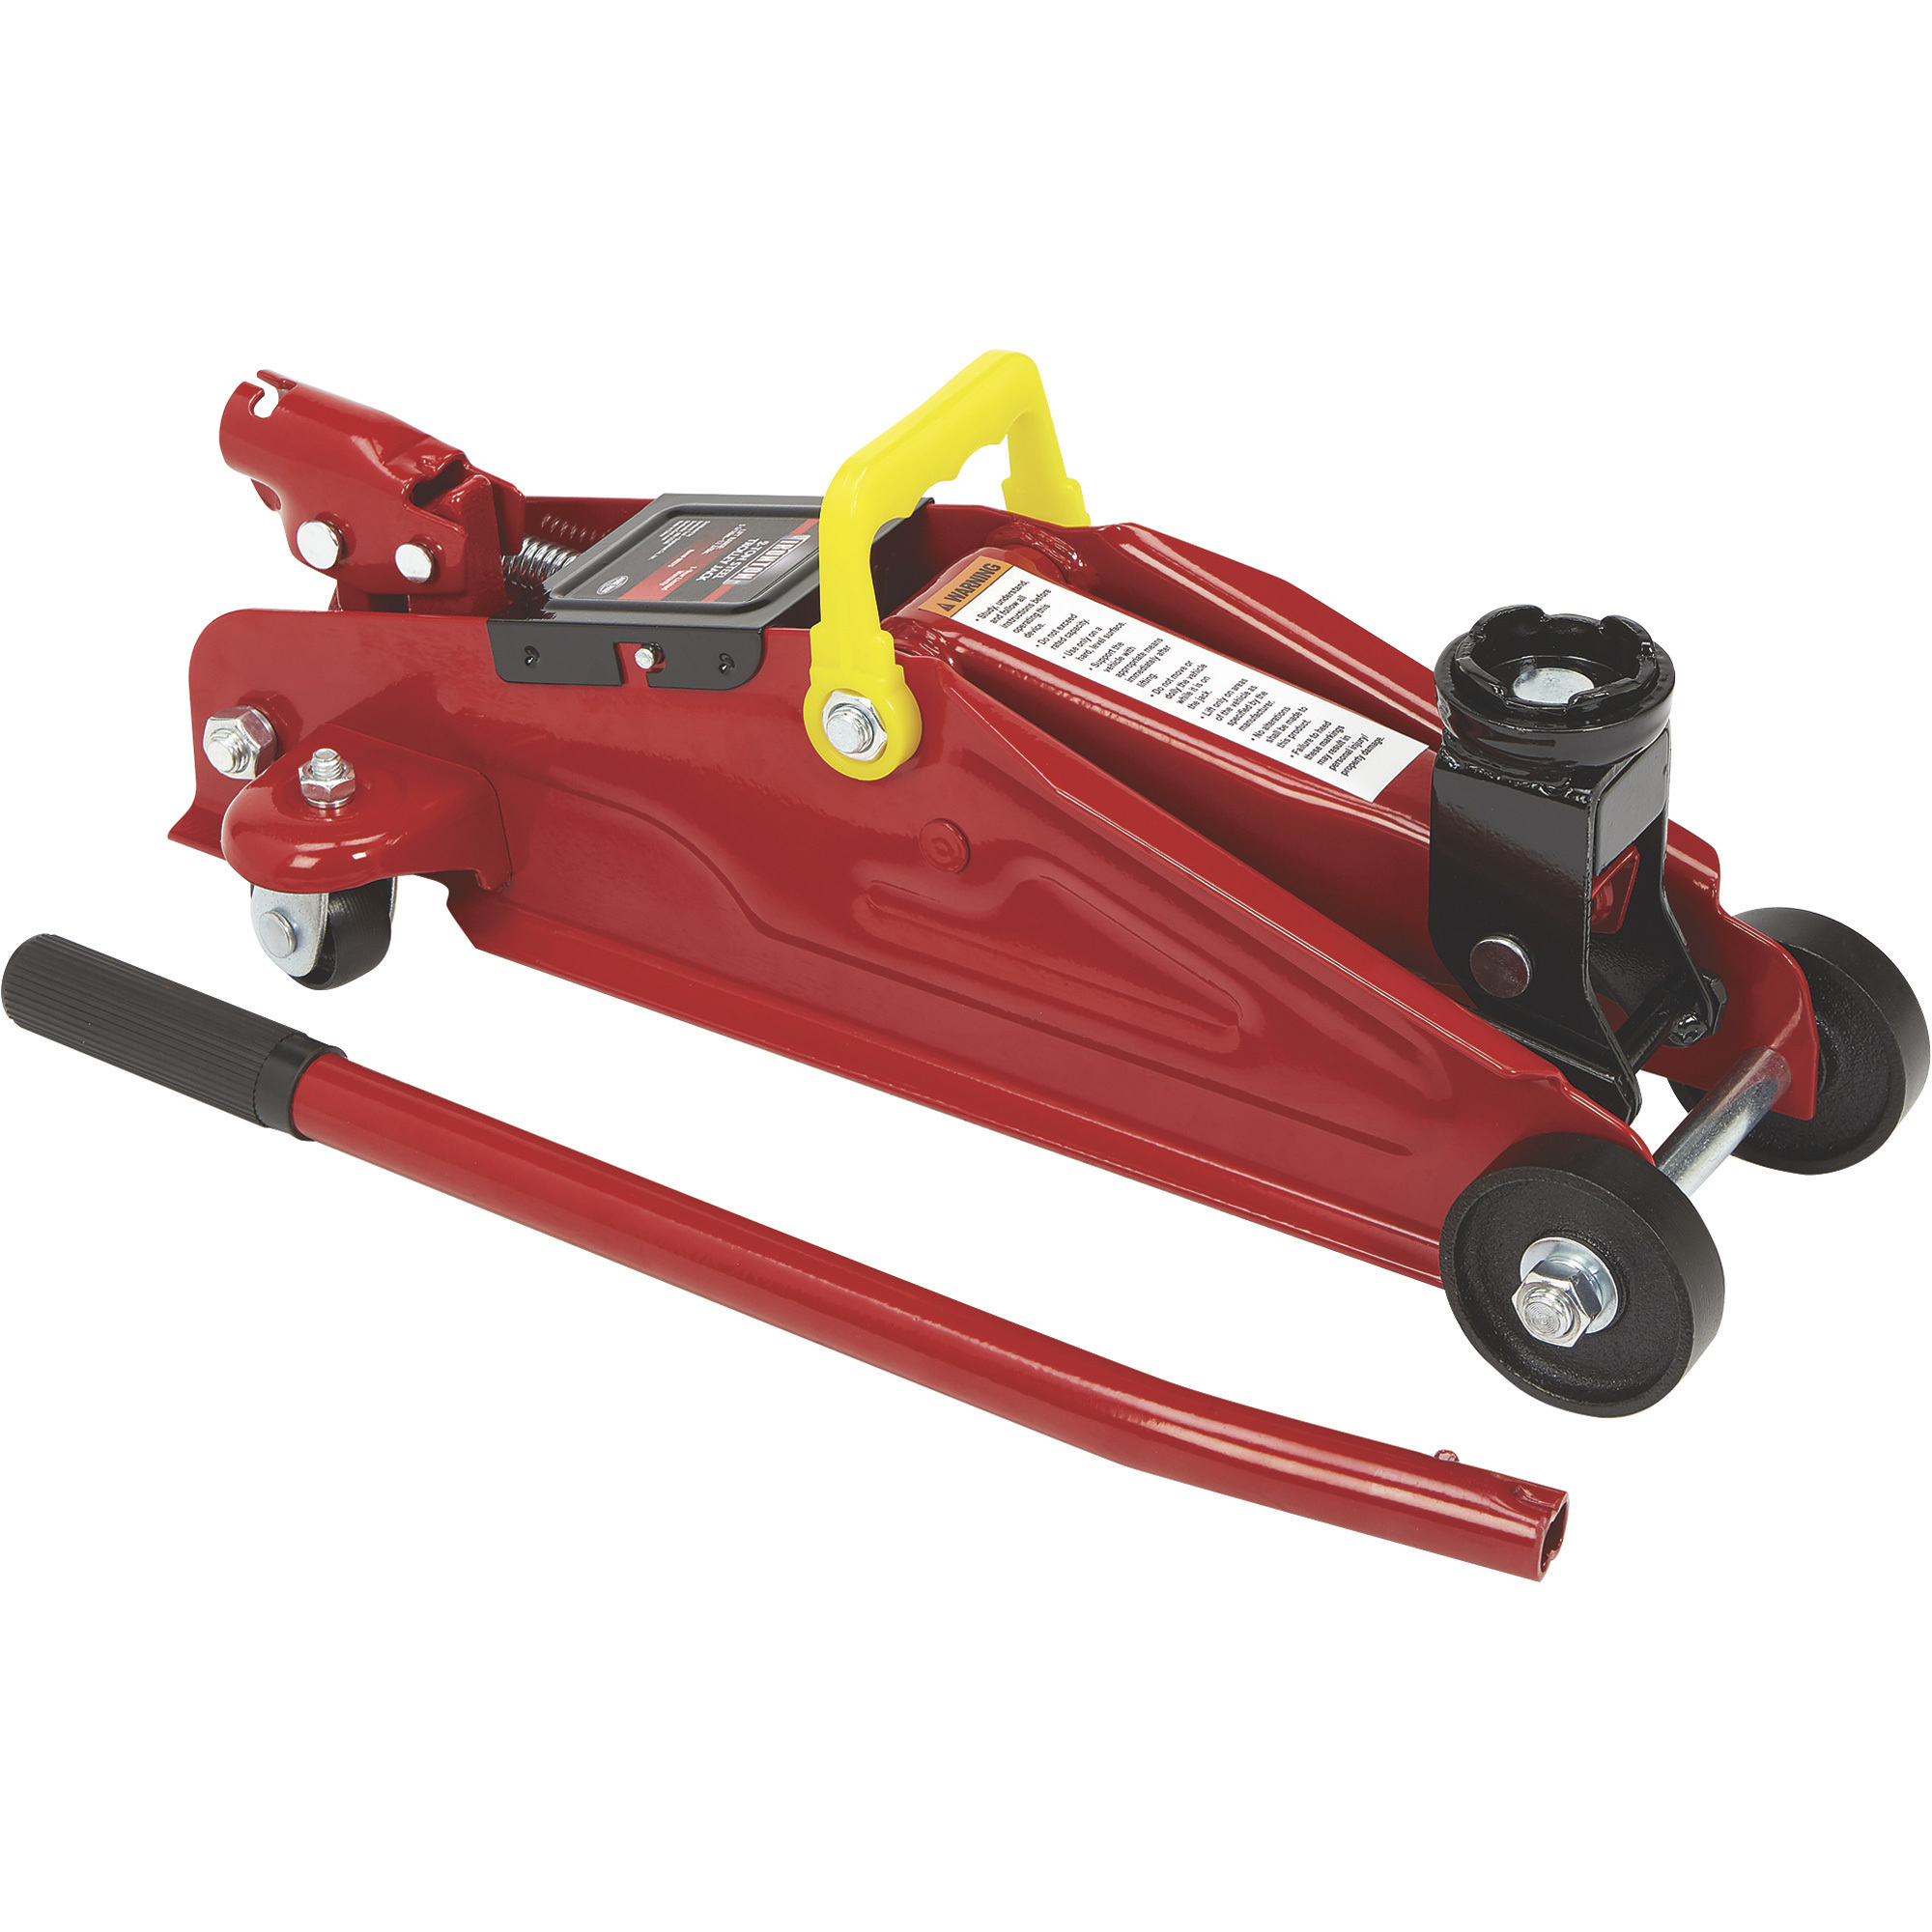 Ironton Hydraulic Trolley Jack with Carrying Handle â 2-Ton Capacity